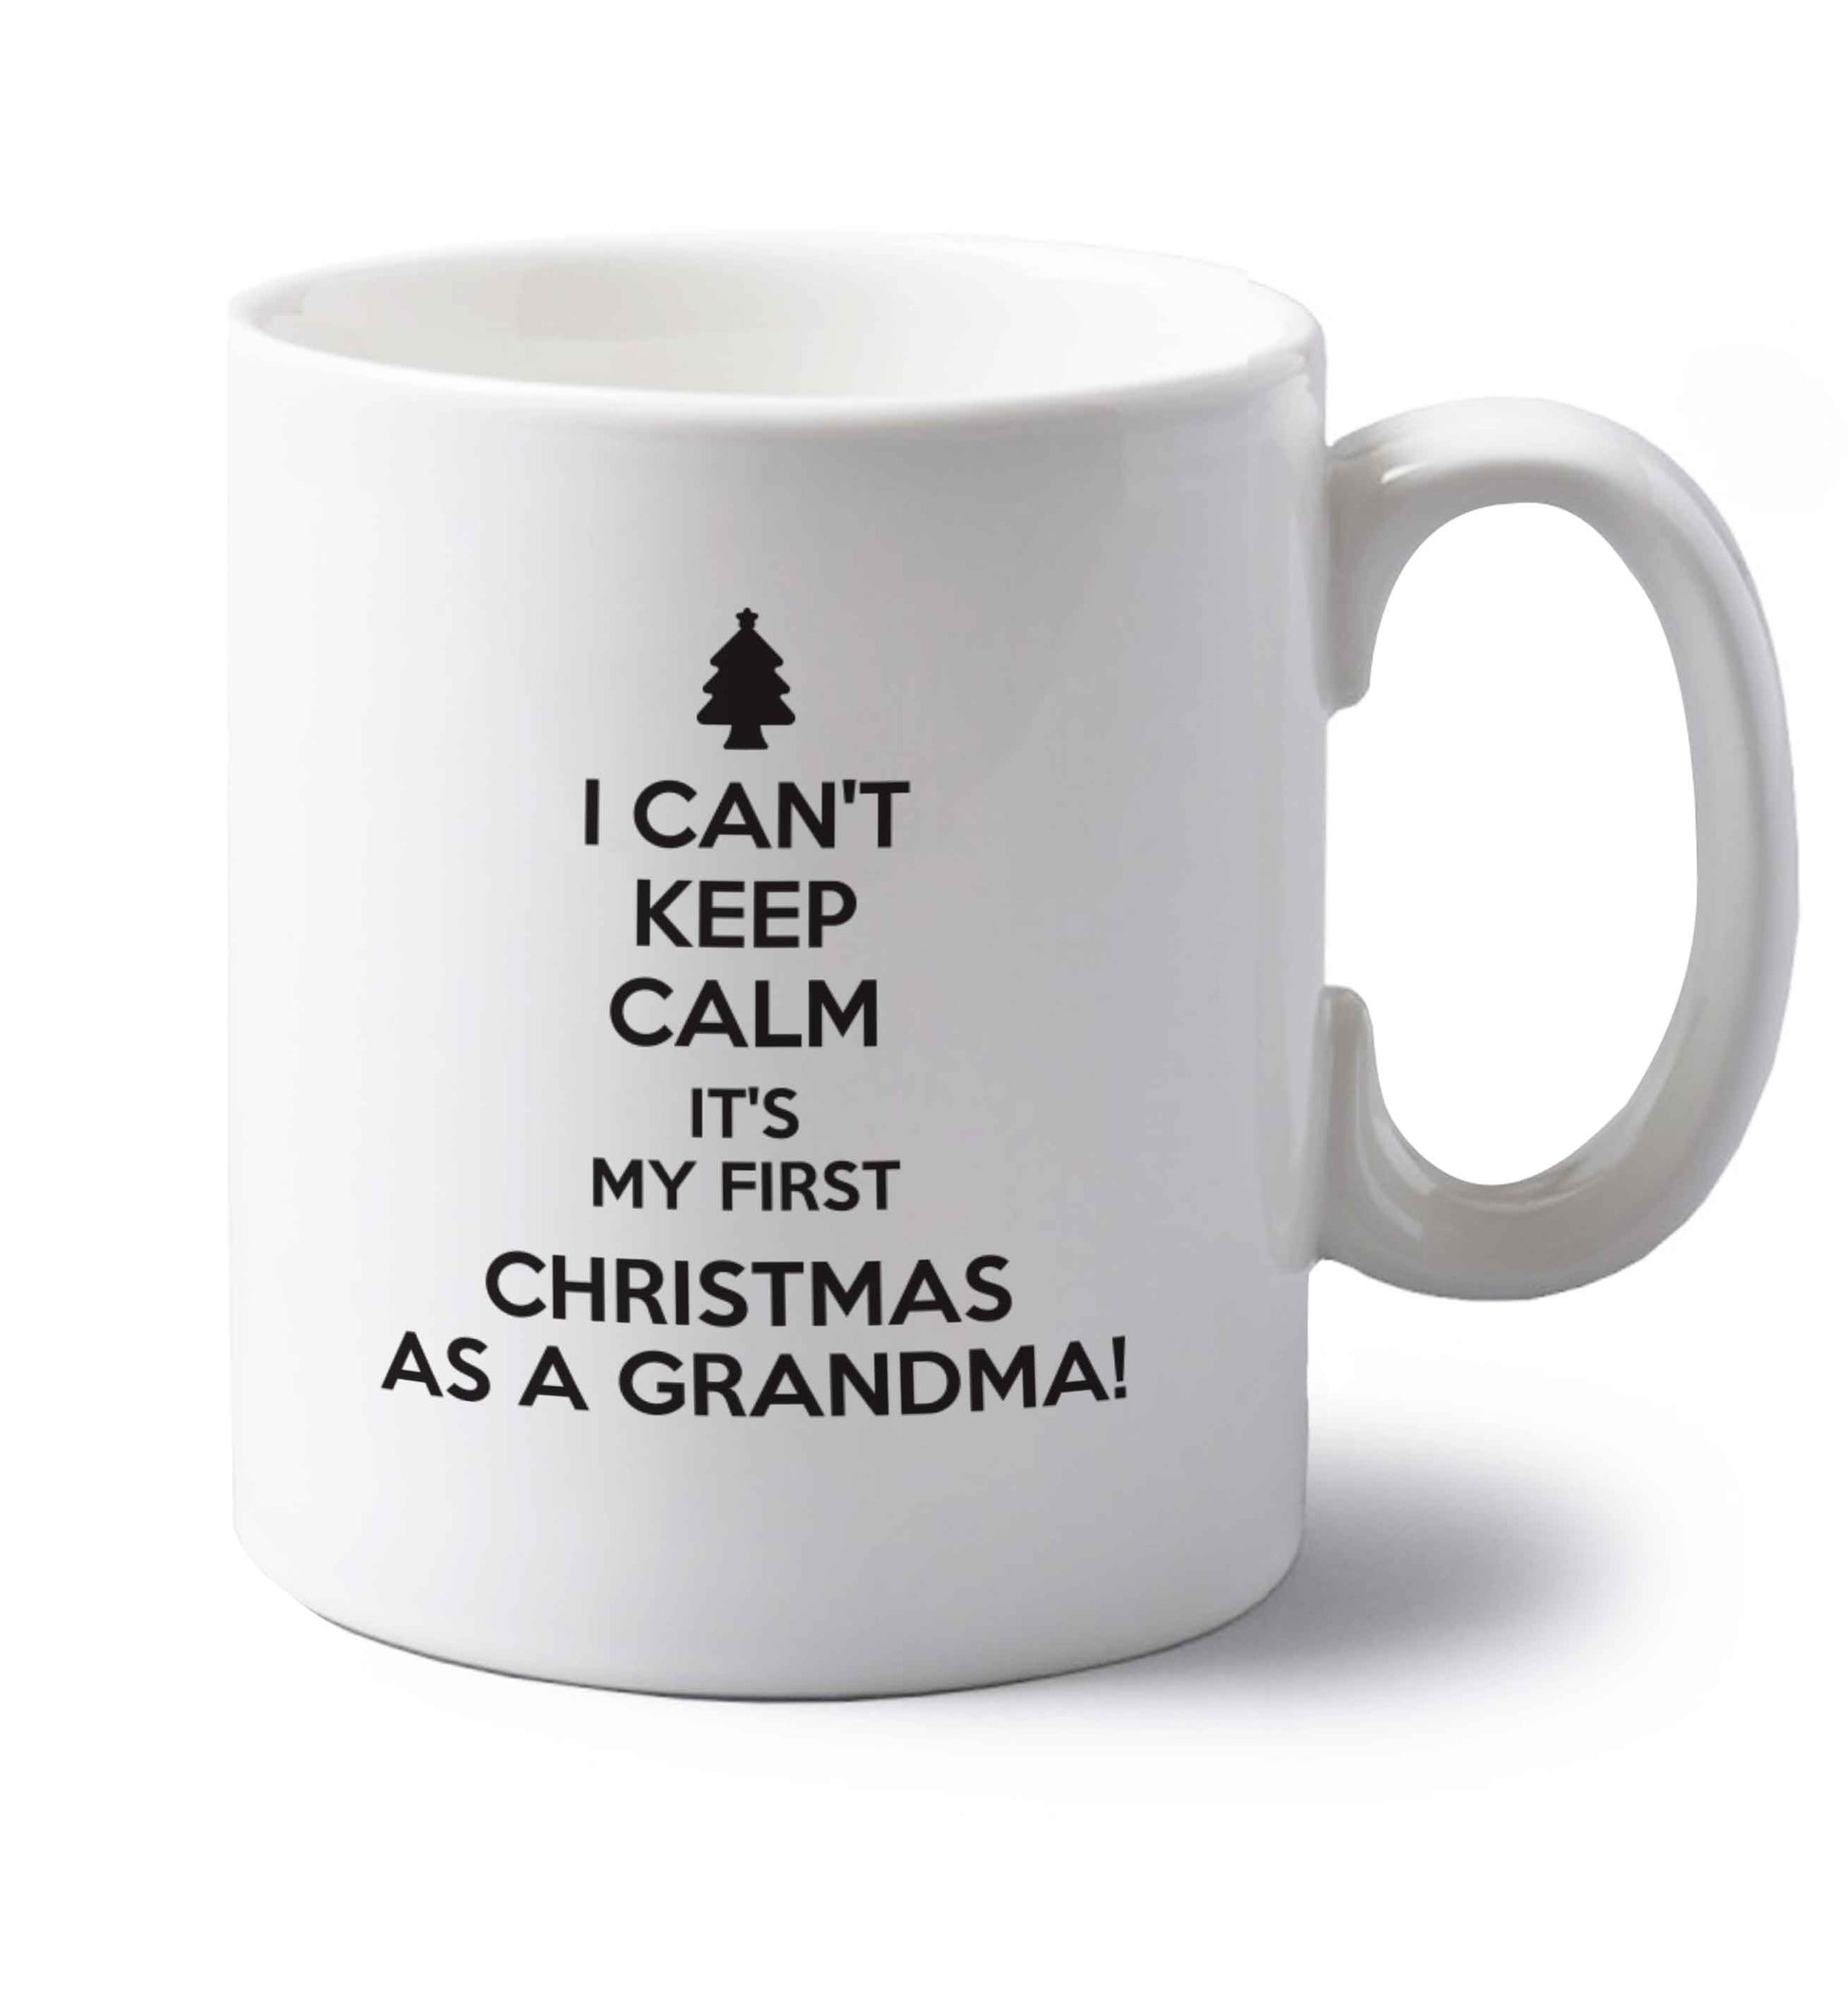 I can't keep calm it's my first Christmas as a grandma! left handed white ceramic mug 